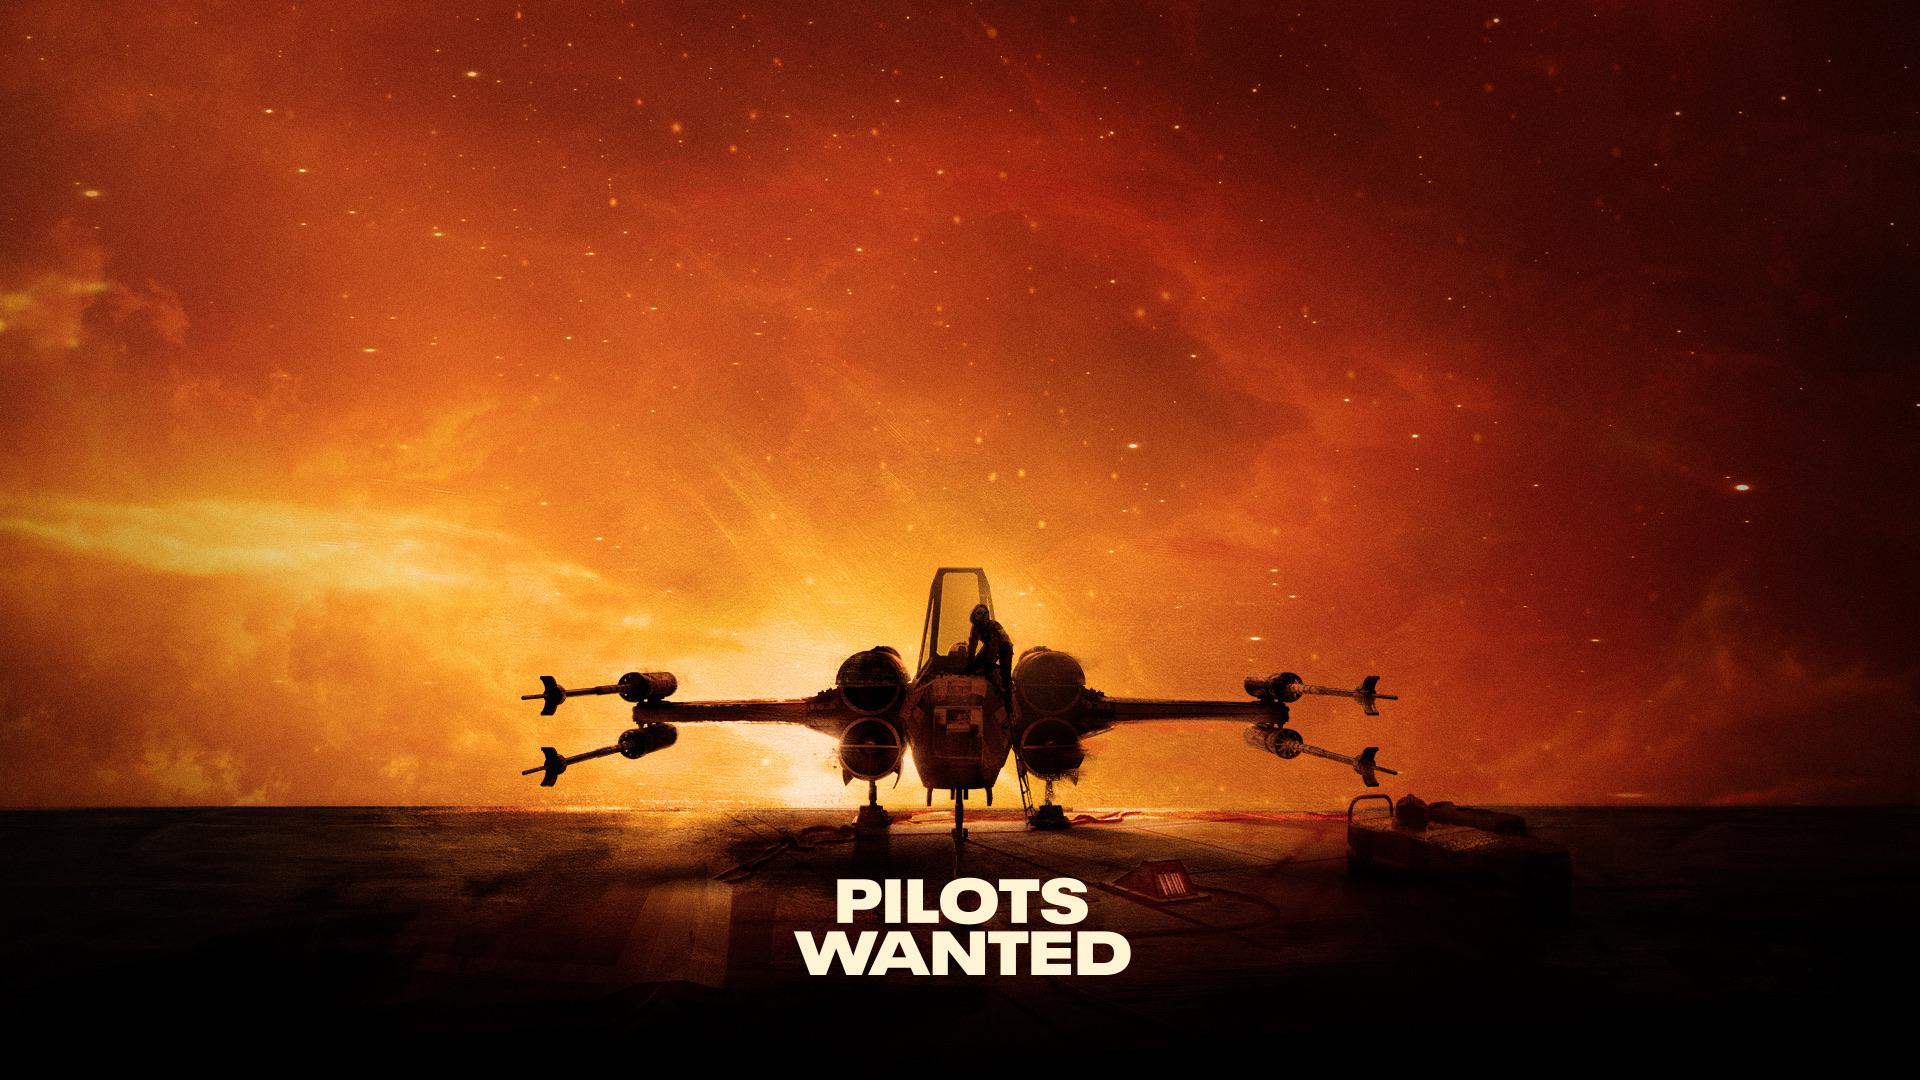 New Promo Image For “Pilots Wanted” Airing Monday: StarWarsLeaks